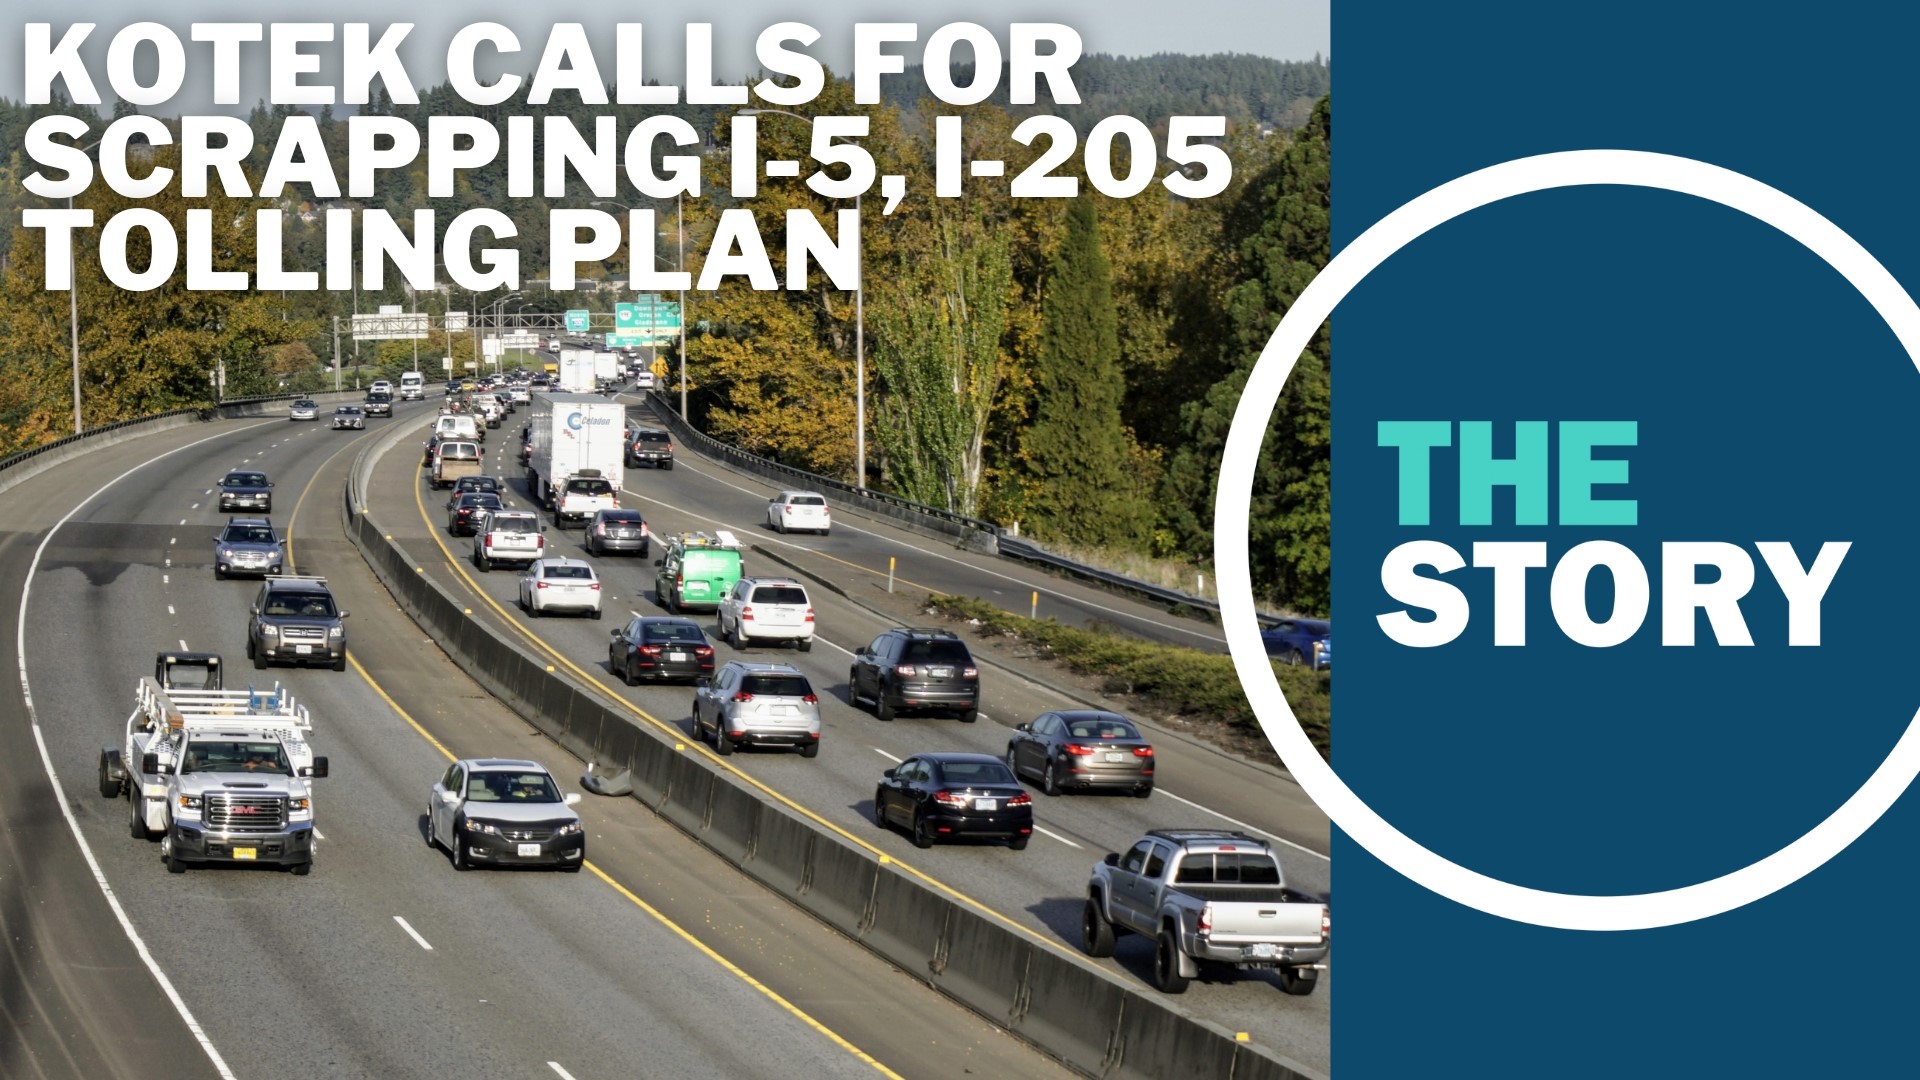 Critics are cheering the demise of the Portland freeway toll plan, but it's less clear what the change will mean for projects that were counting on the revenue.